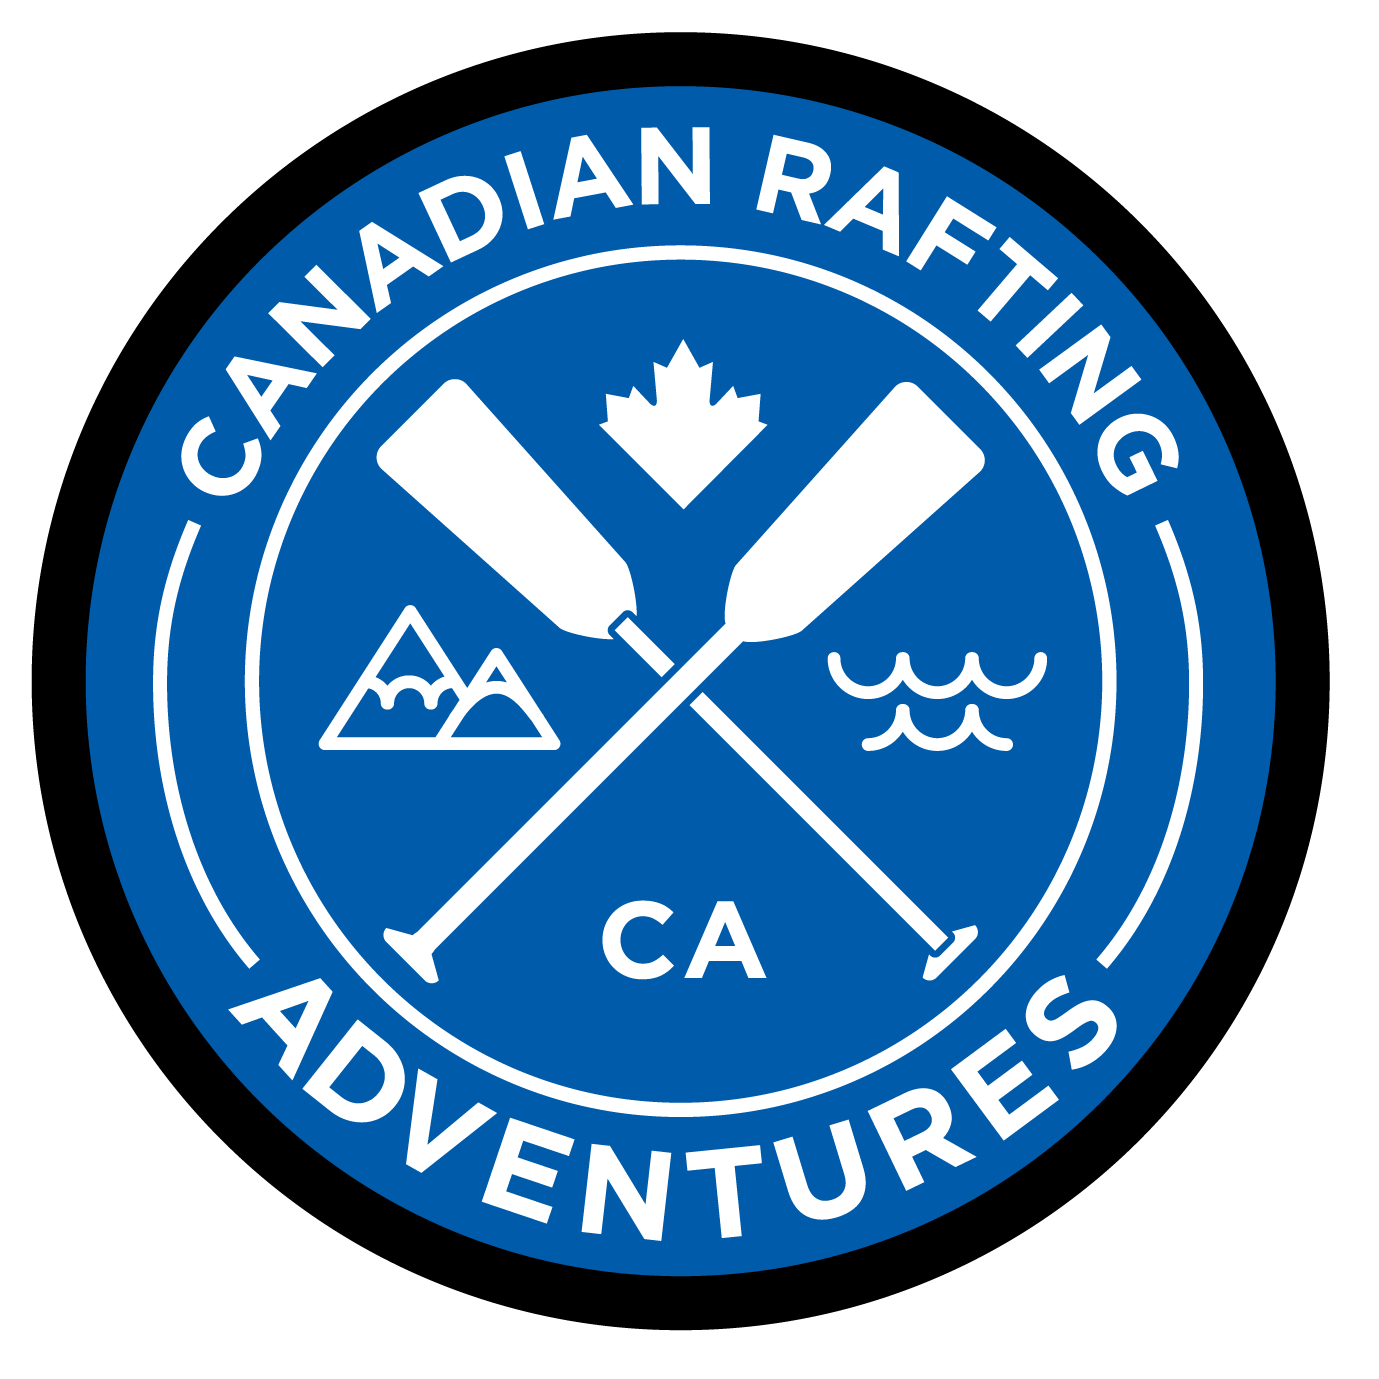 Canadian Rafting Adventures specializes in small group rafting adventures on the best wilderness rivers in Western Canada.